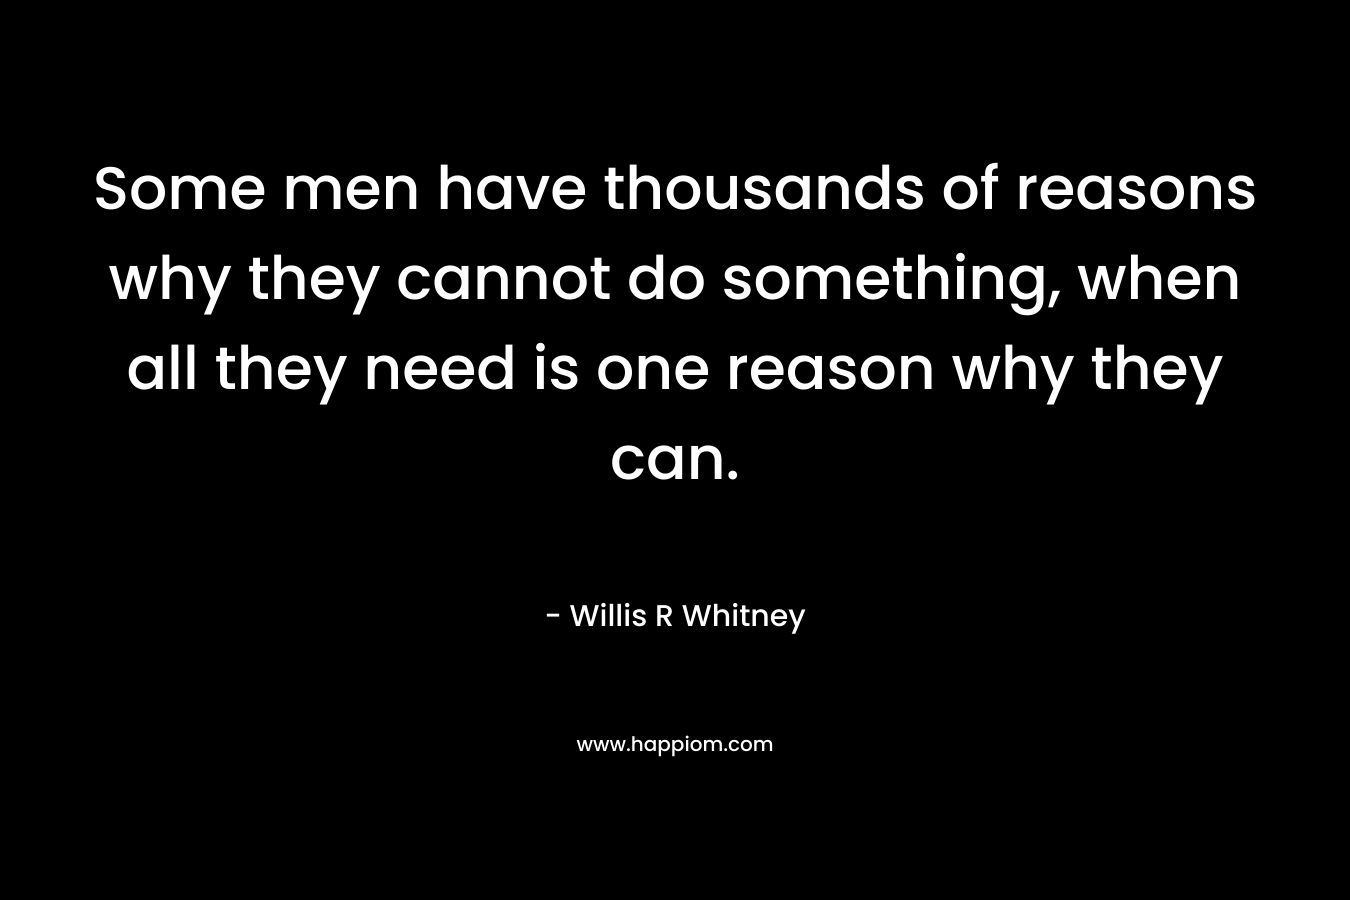 Some men have thousands of reasons why they cannot do something, when all they need is one reason why they can.